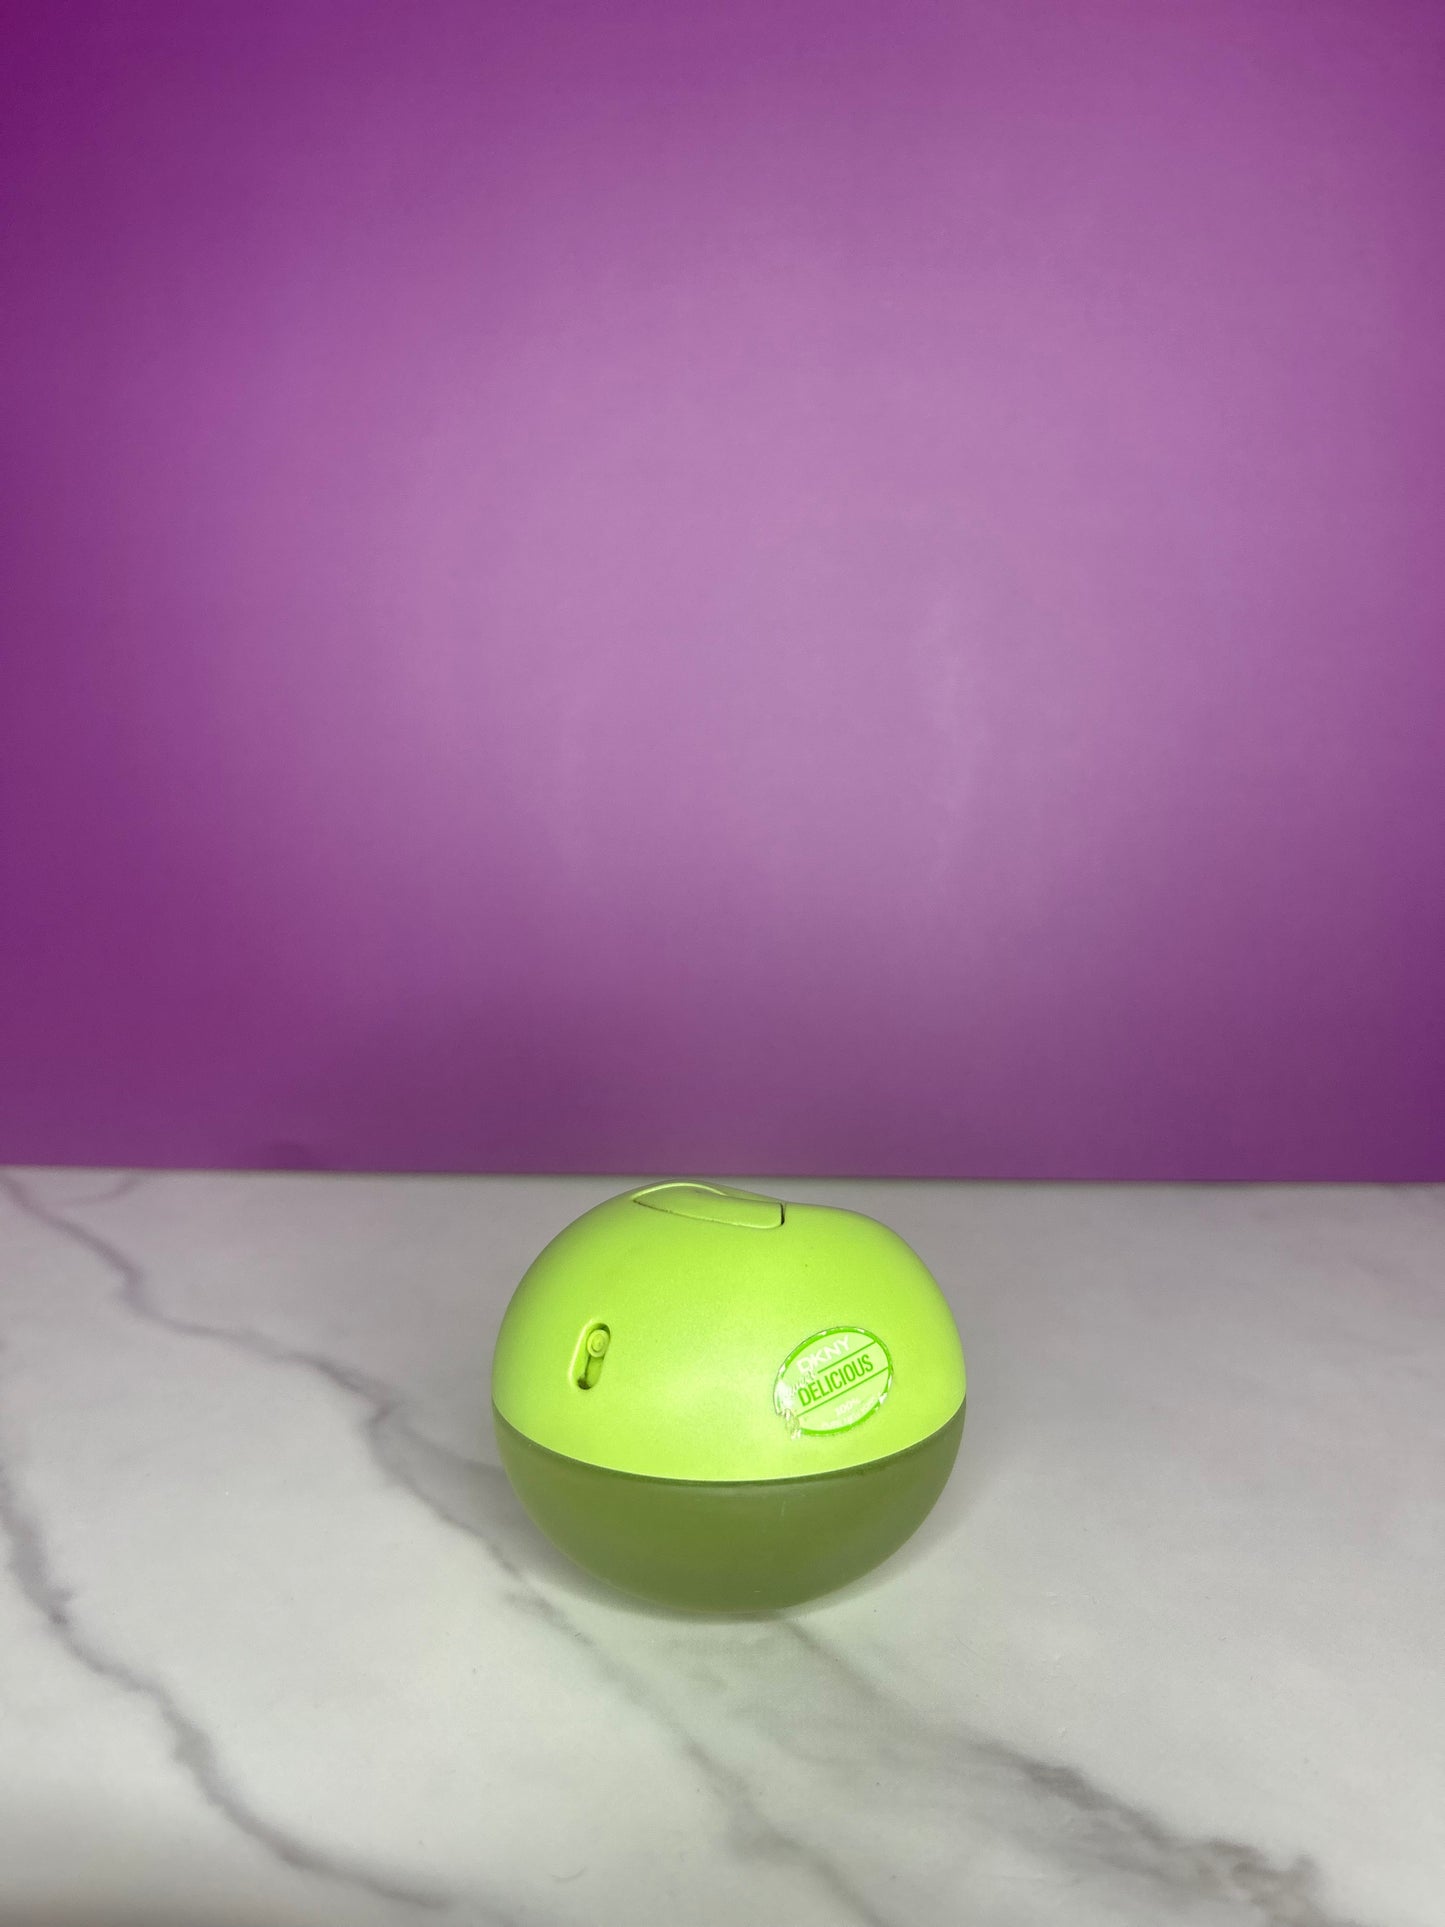 BE DELICIOUS SWEET DELICIOUS TART KEY LIME-DKNY